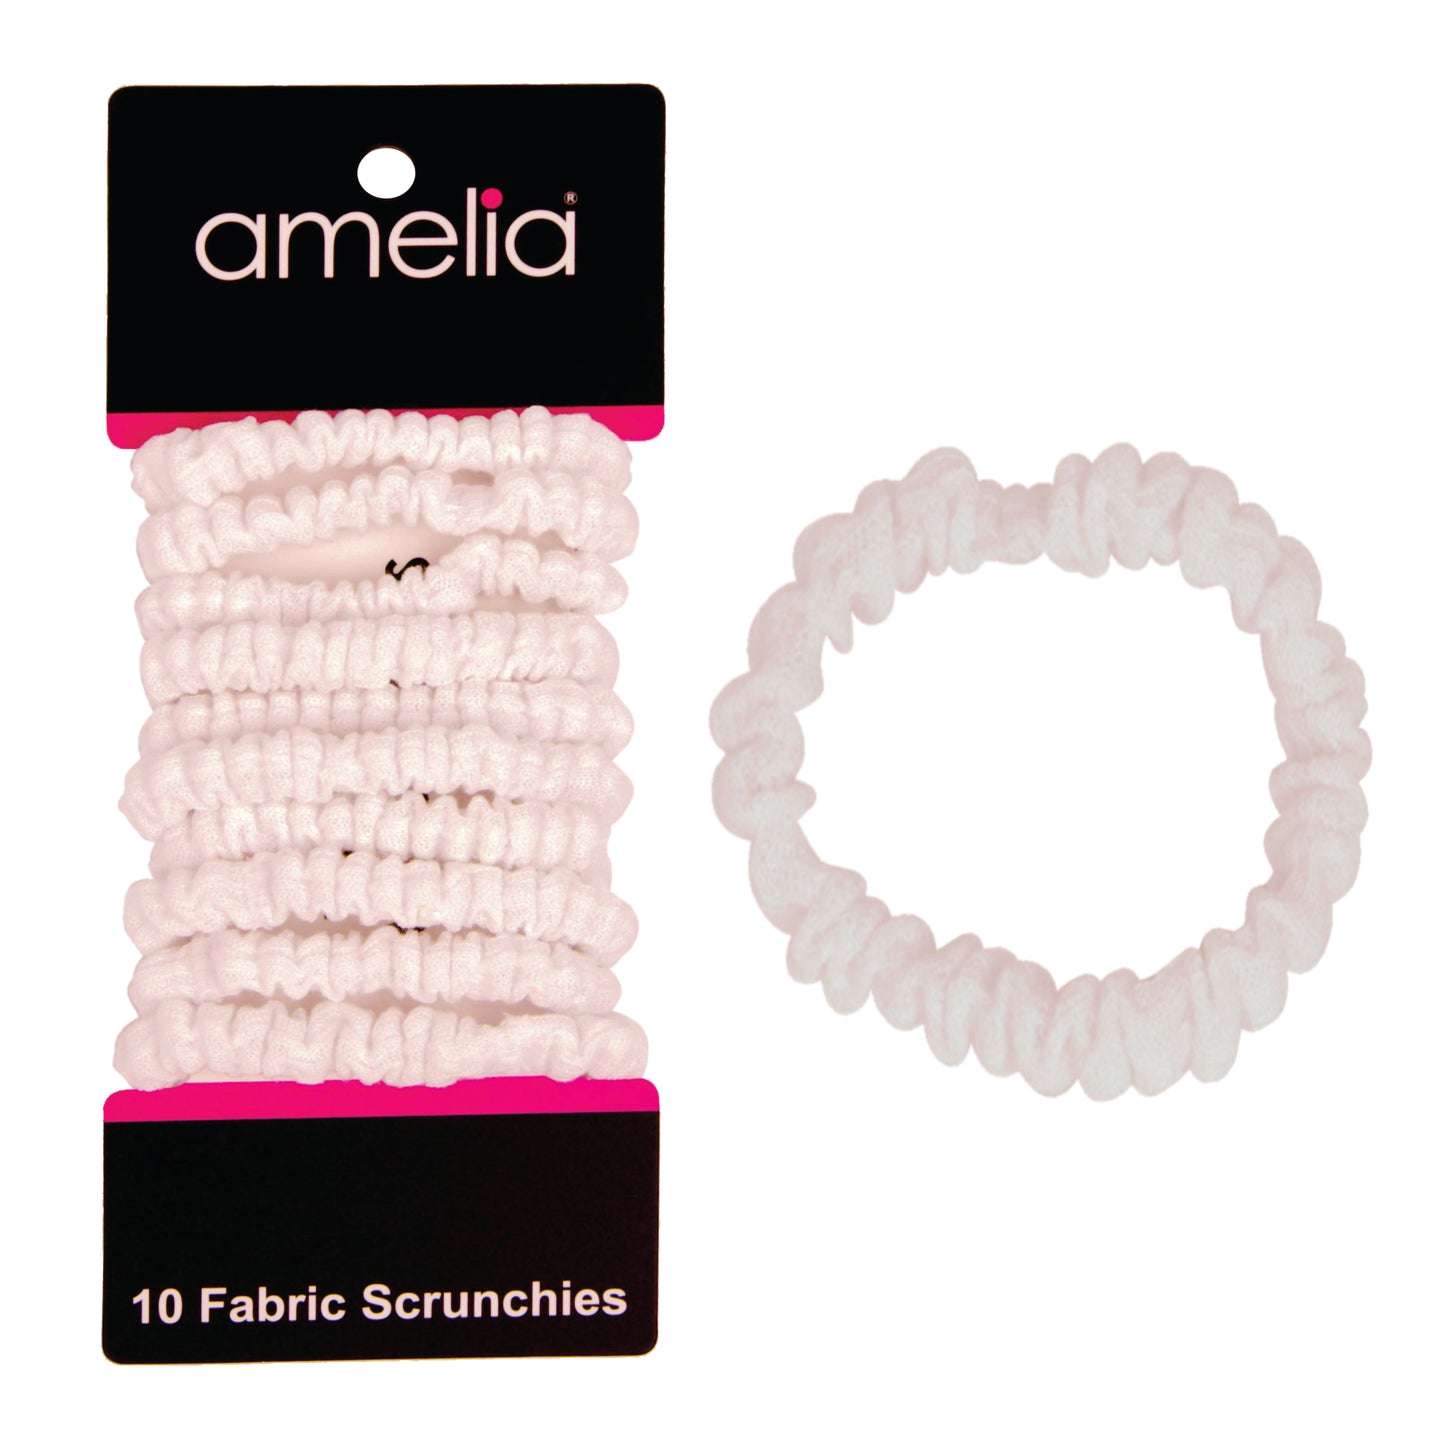 Amelia Beauty, White Ribbed Scrunchies, 2.25in Diameter, Gentle on Hair, Strong Hold, No Snag, No Dents or Creases. 10 Pack